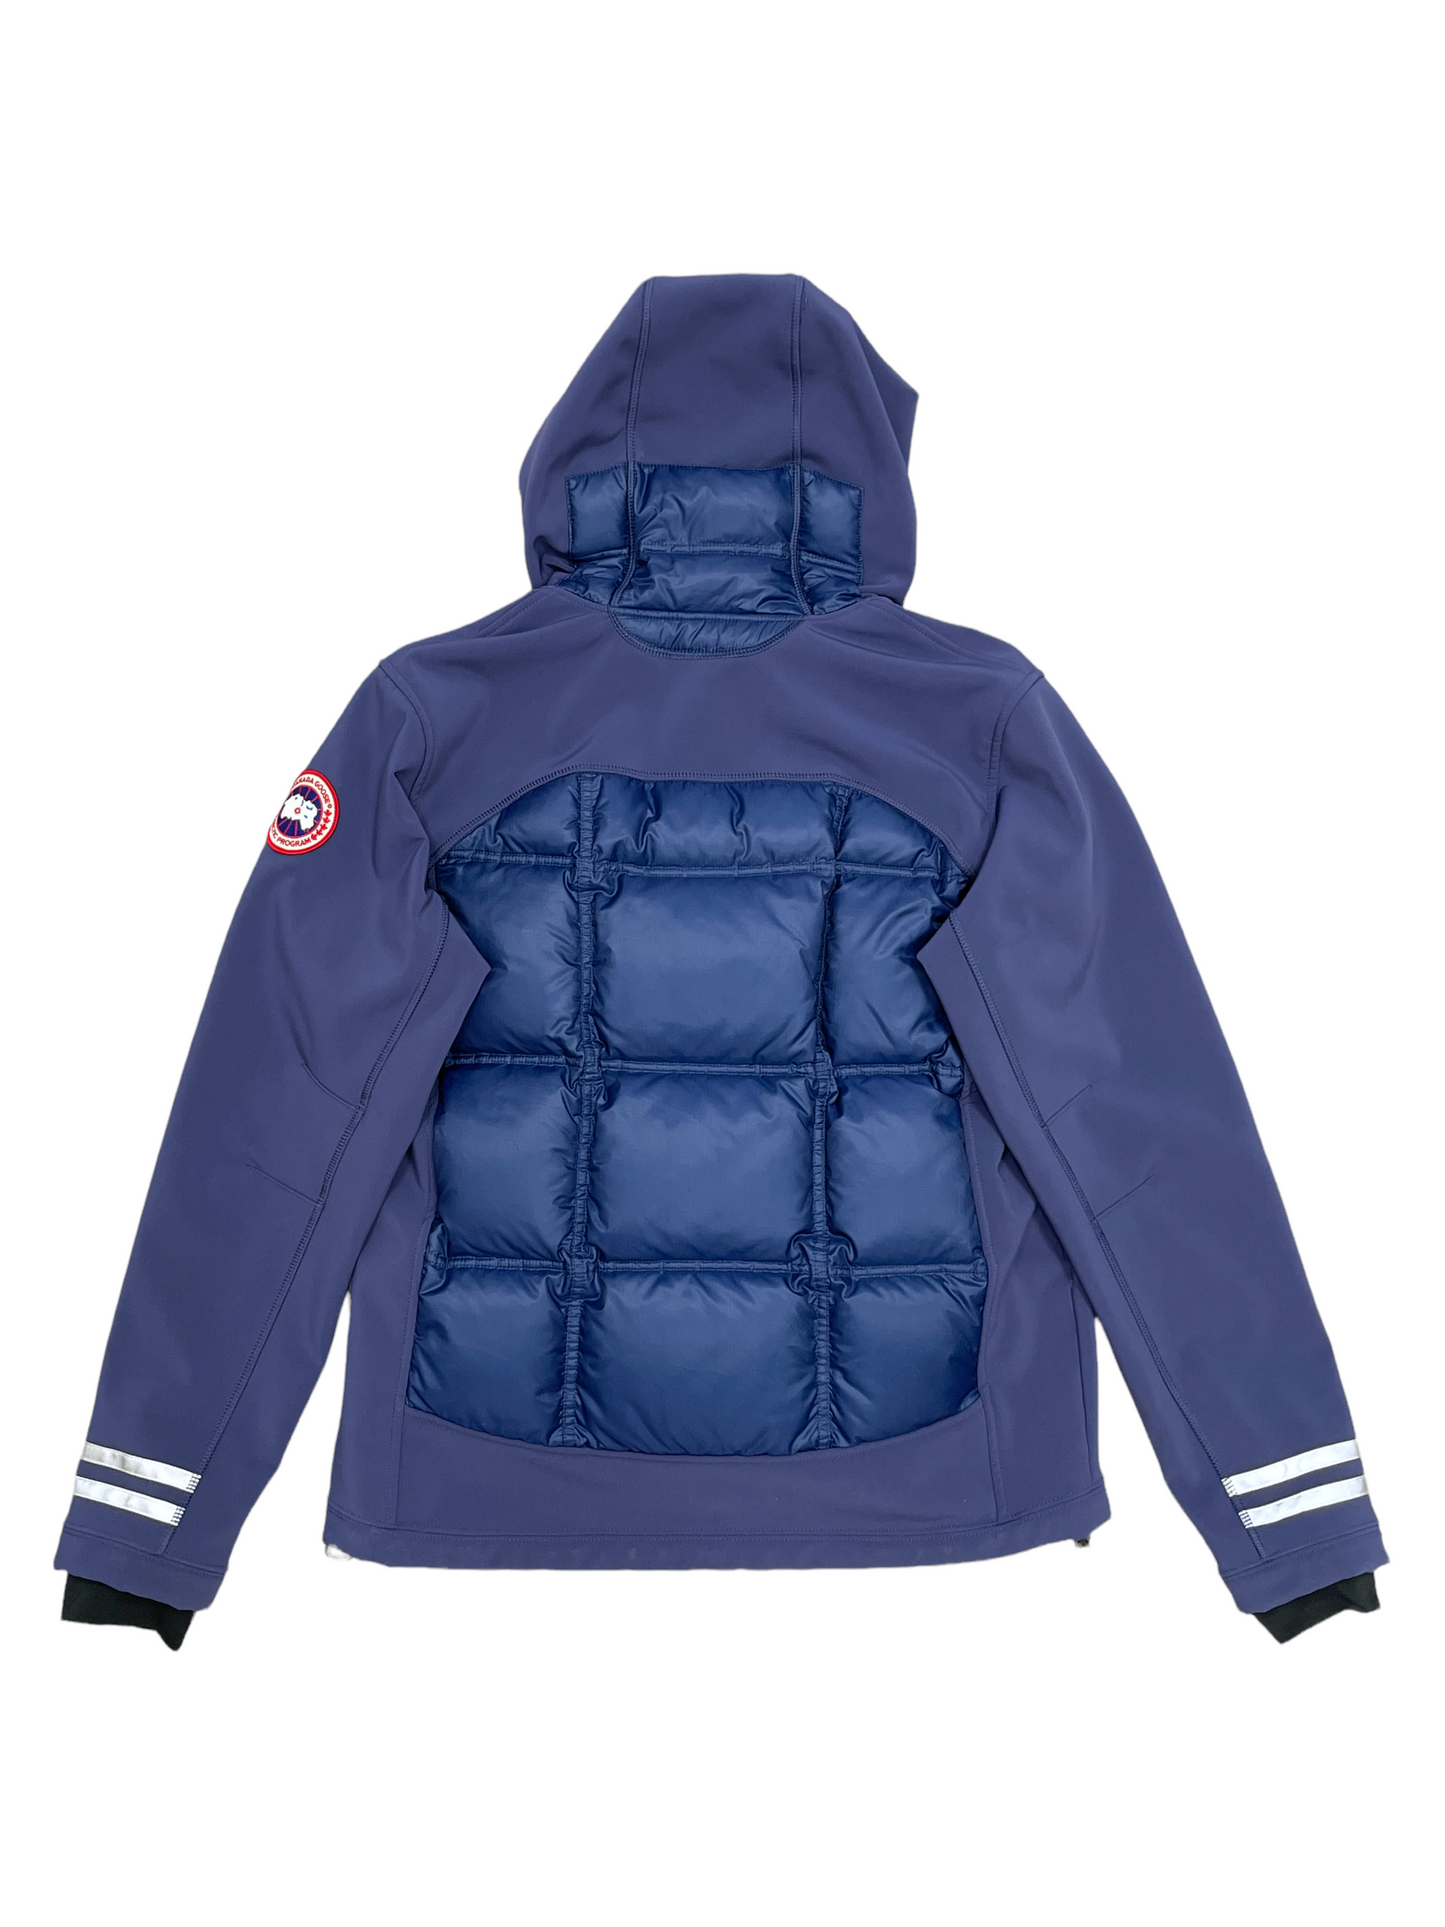 Canada Goose Blue Down Filled Hybrid Jacket Large - Genuine Design Luxury Consignment for Men. New & Pre-Owned Clothing, Shoes, & Accessories. Calgary, Canada